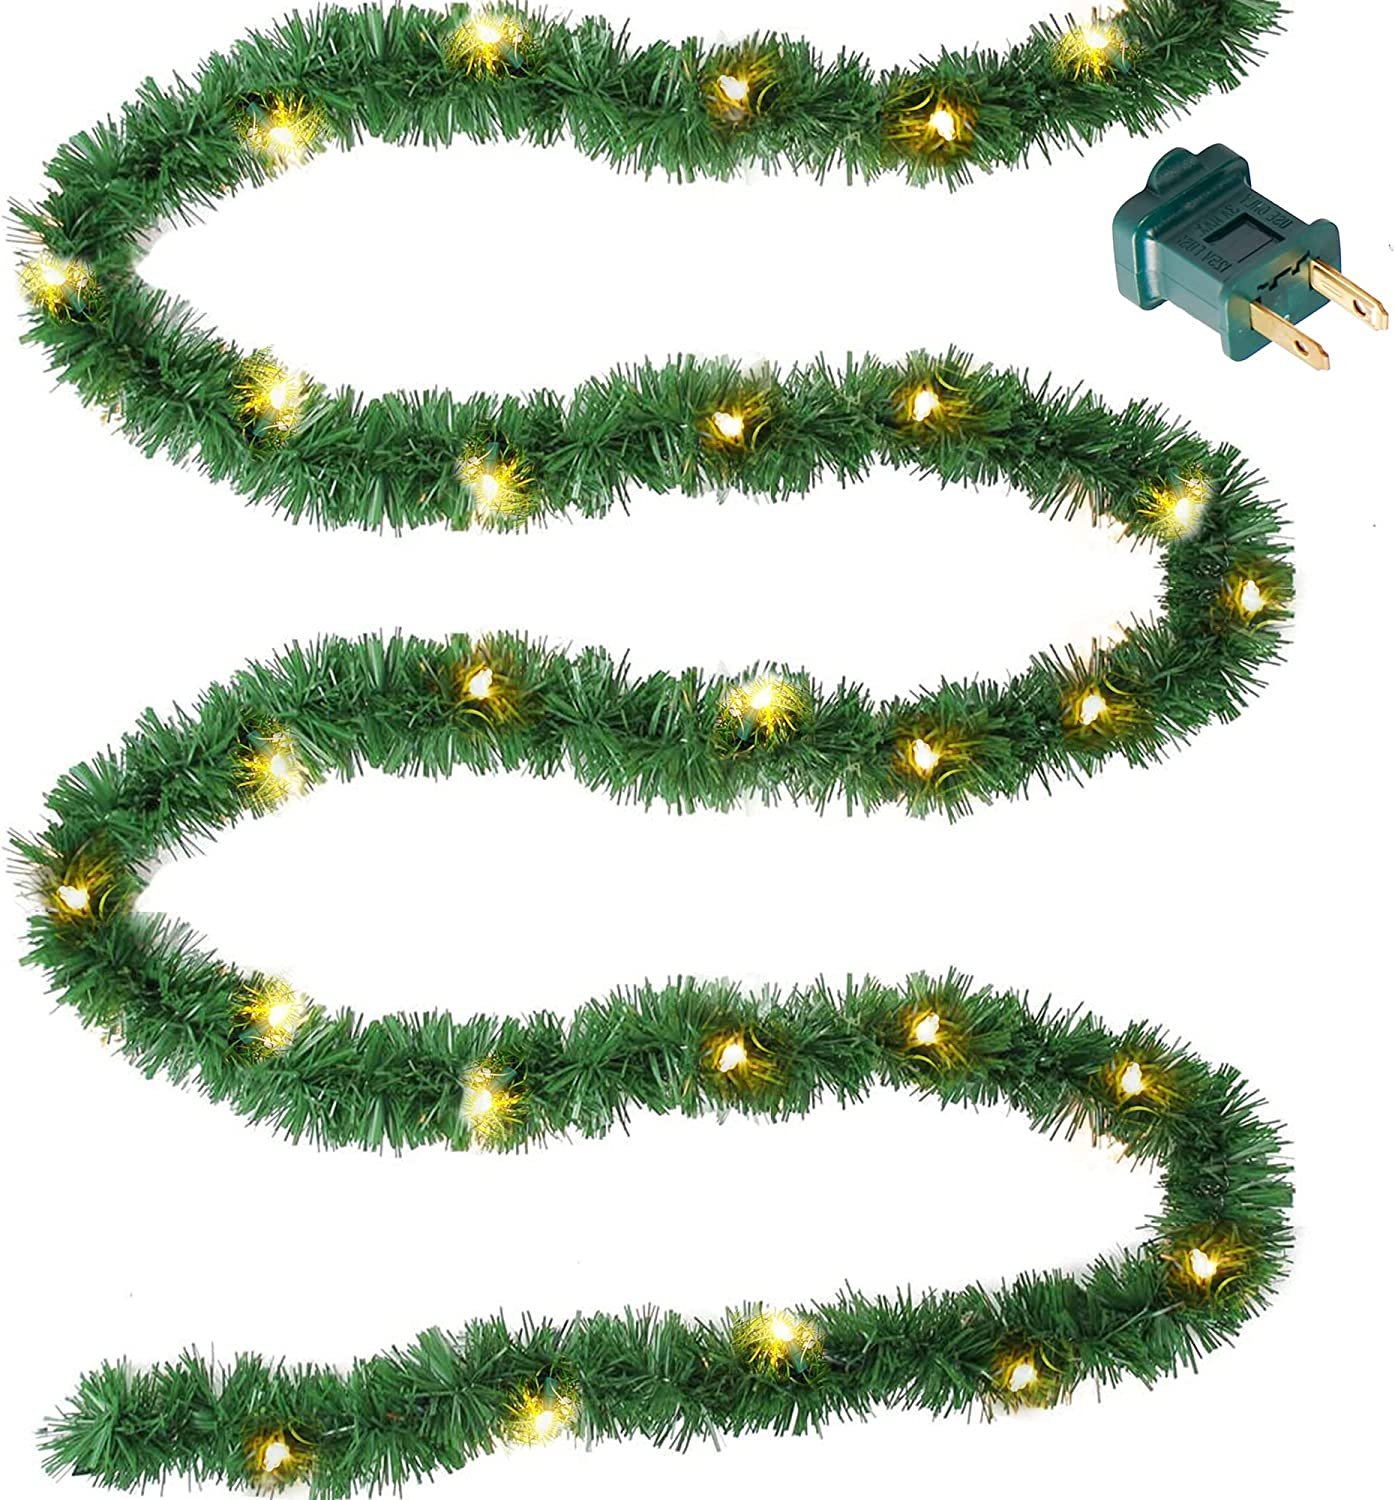 Prelit garland for outdoor use entrway christmas